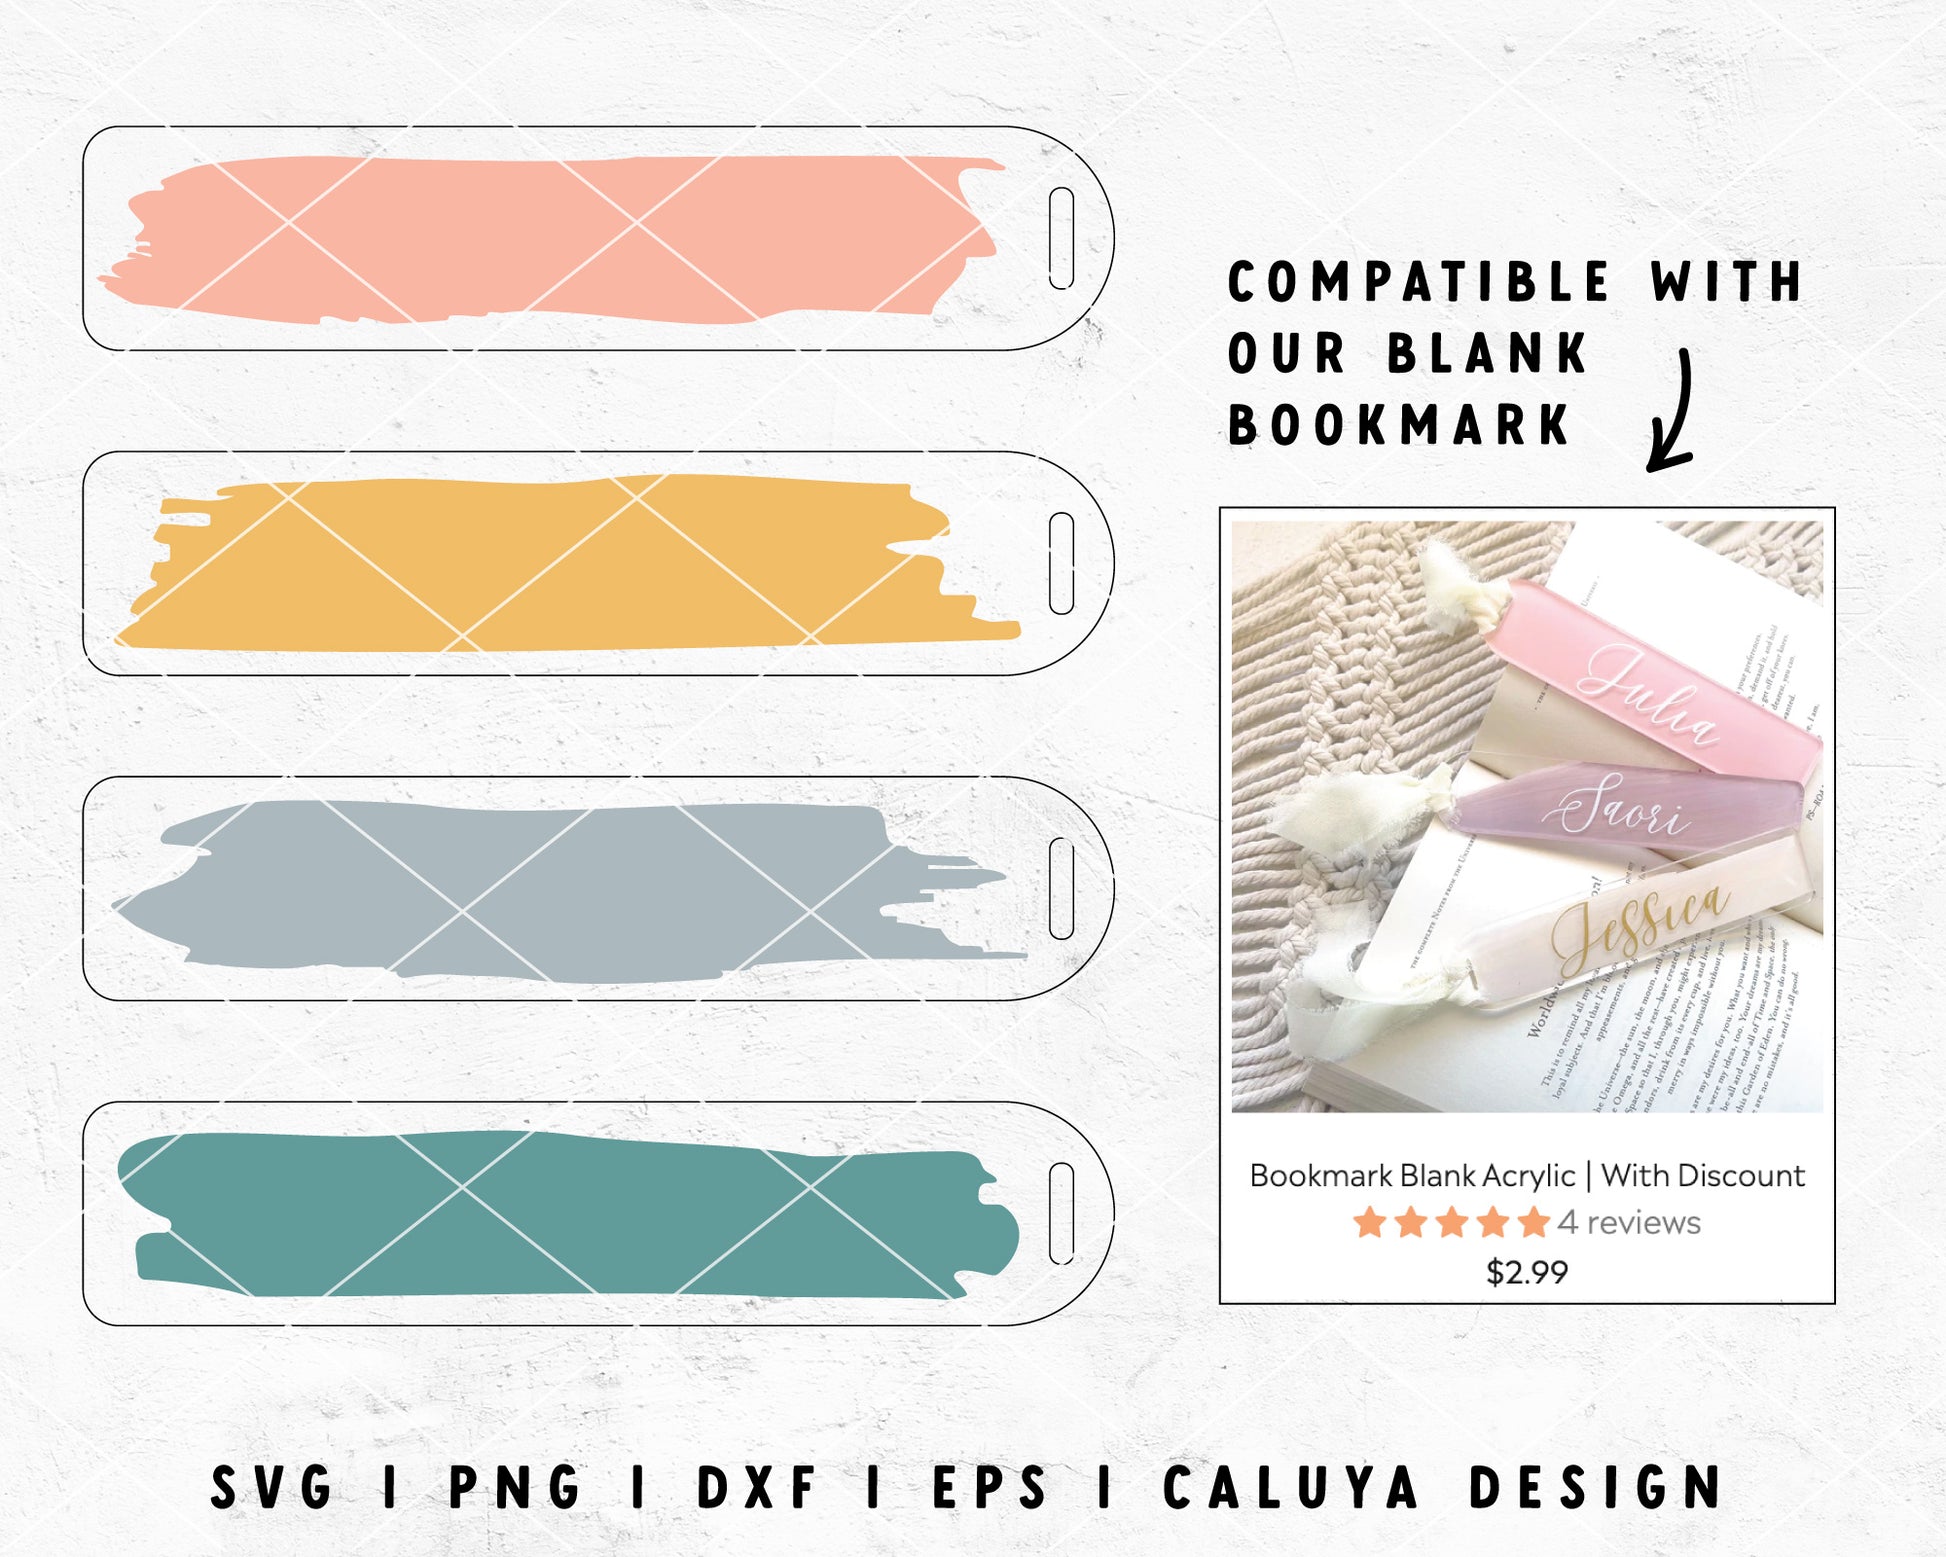 Caluya Design. - Get FREE access to ALL bookmark SVGs including